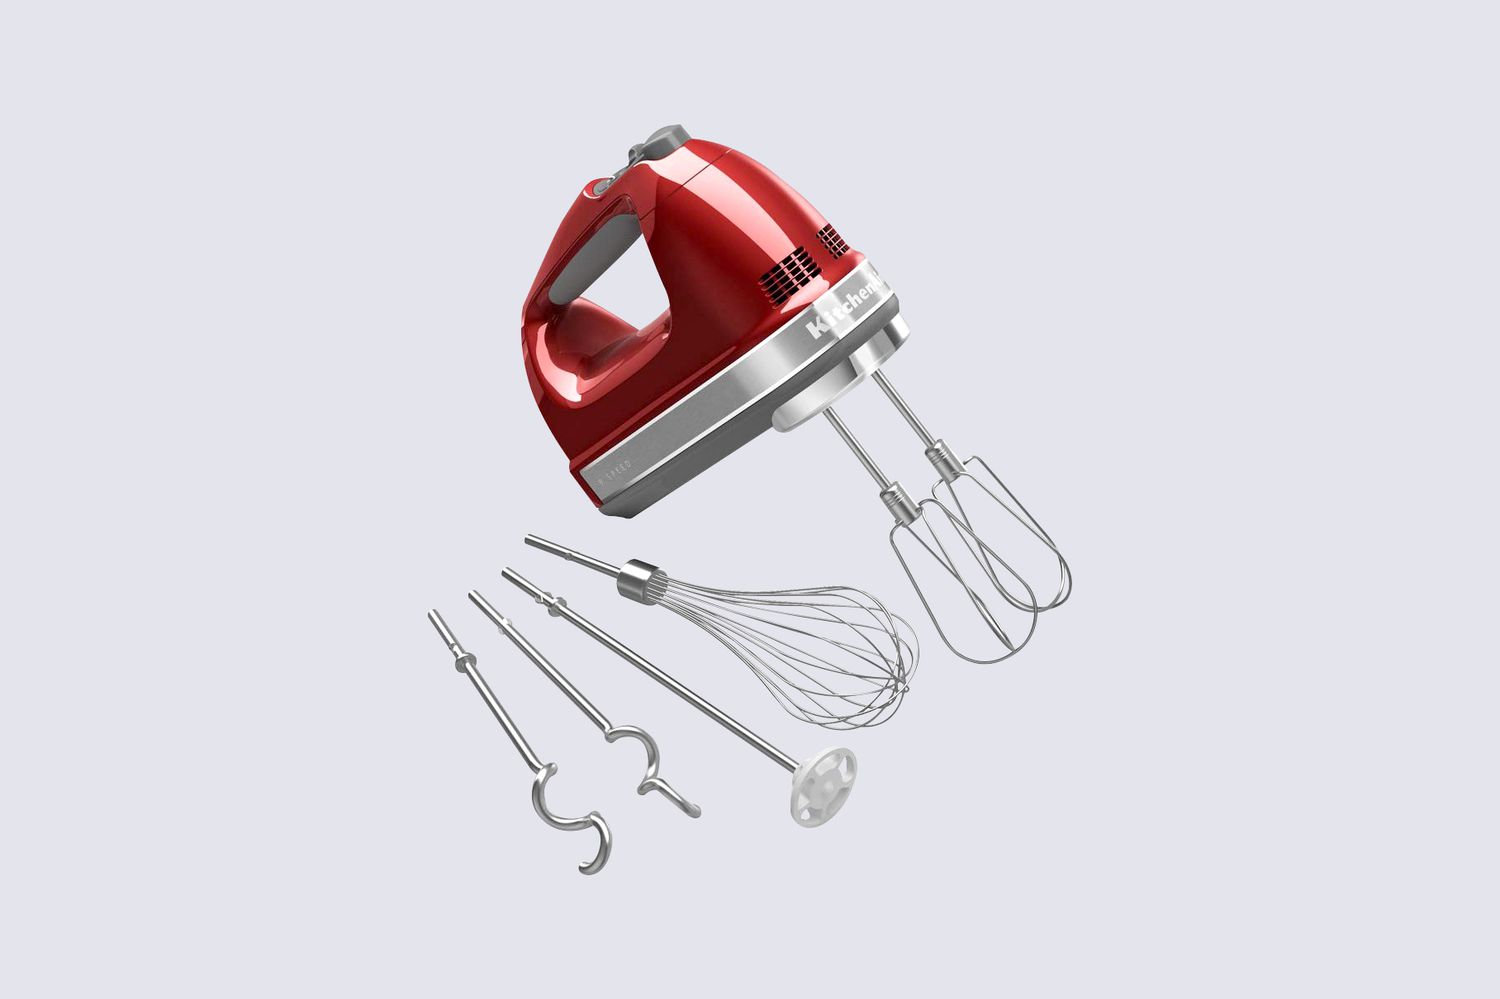 KitchenAid 9-Speed Digital Hand Mixer with Turbo Beater II Accessories and Pro Whisk in Candy Apple Red